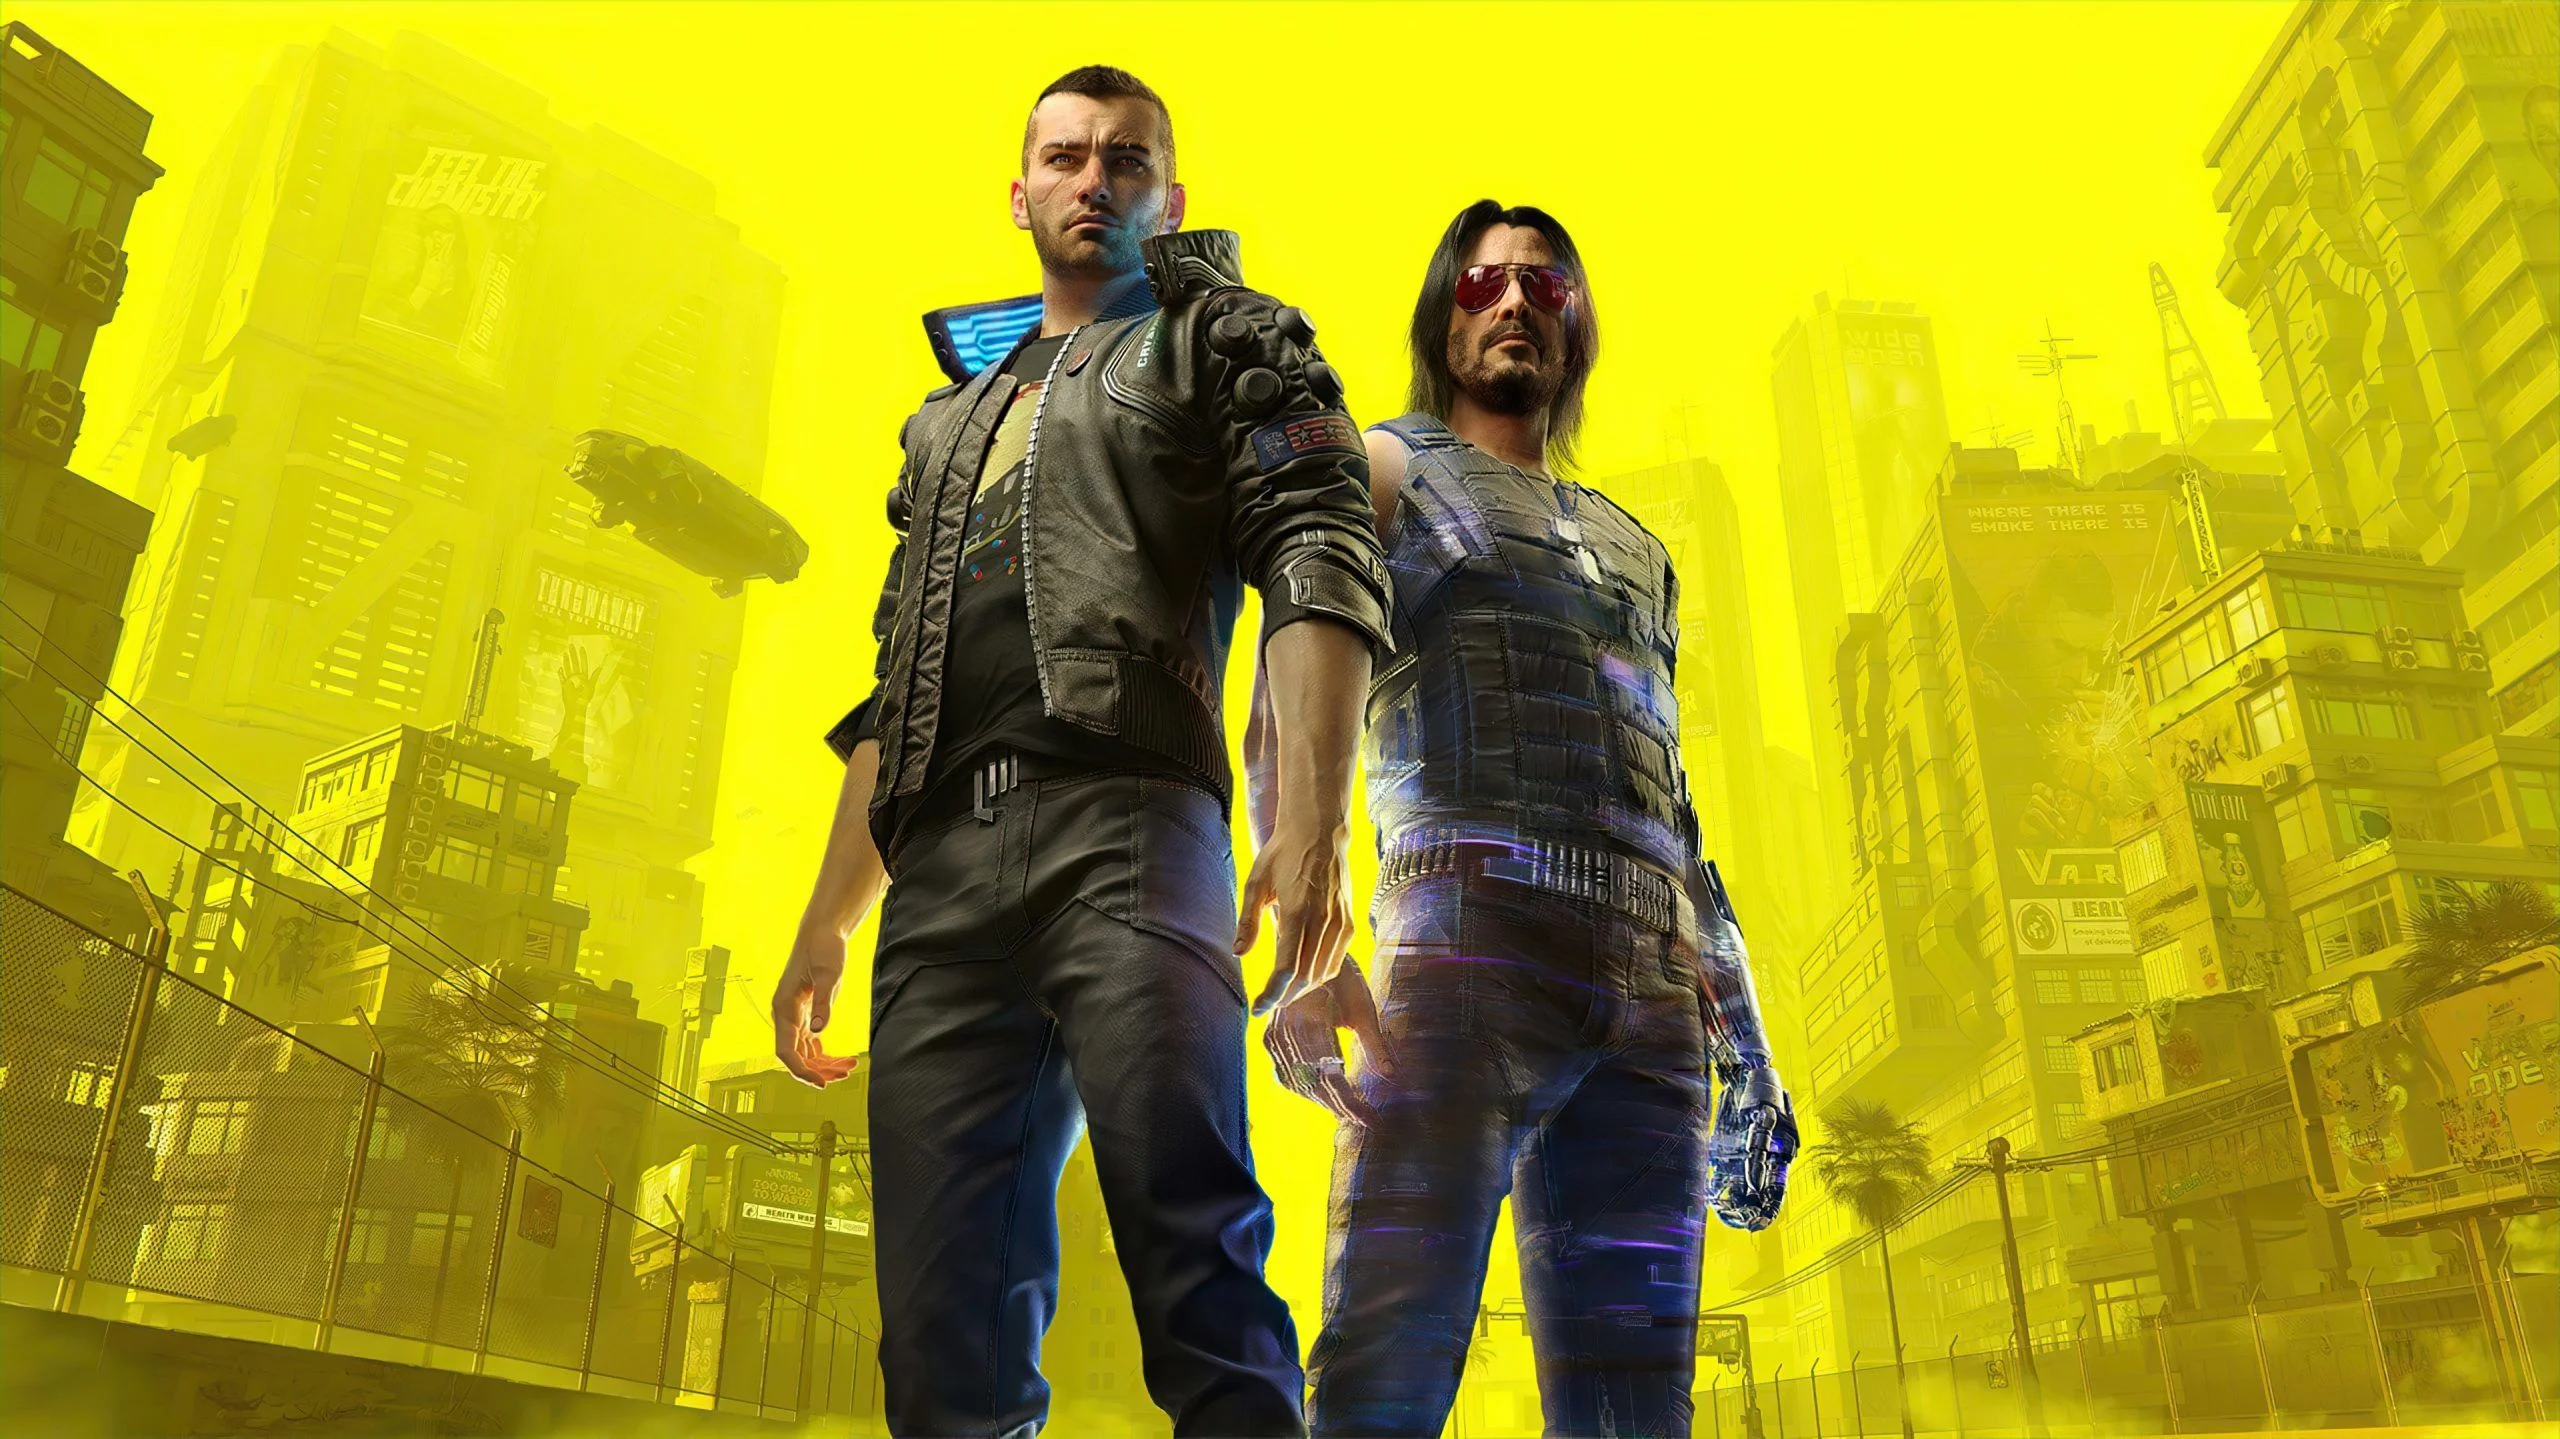 CD Projekt RED has finished working on Cyberpunk 2077